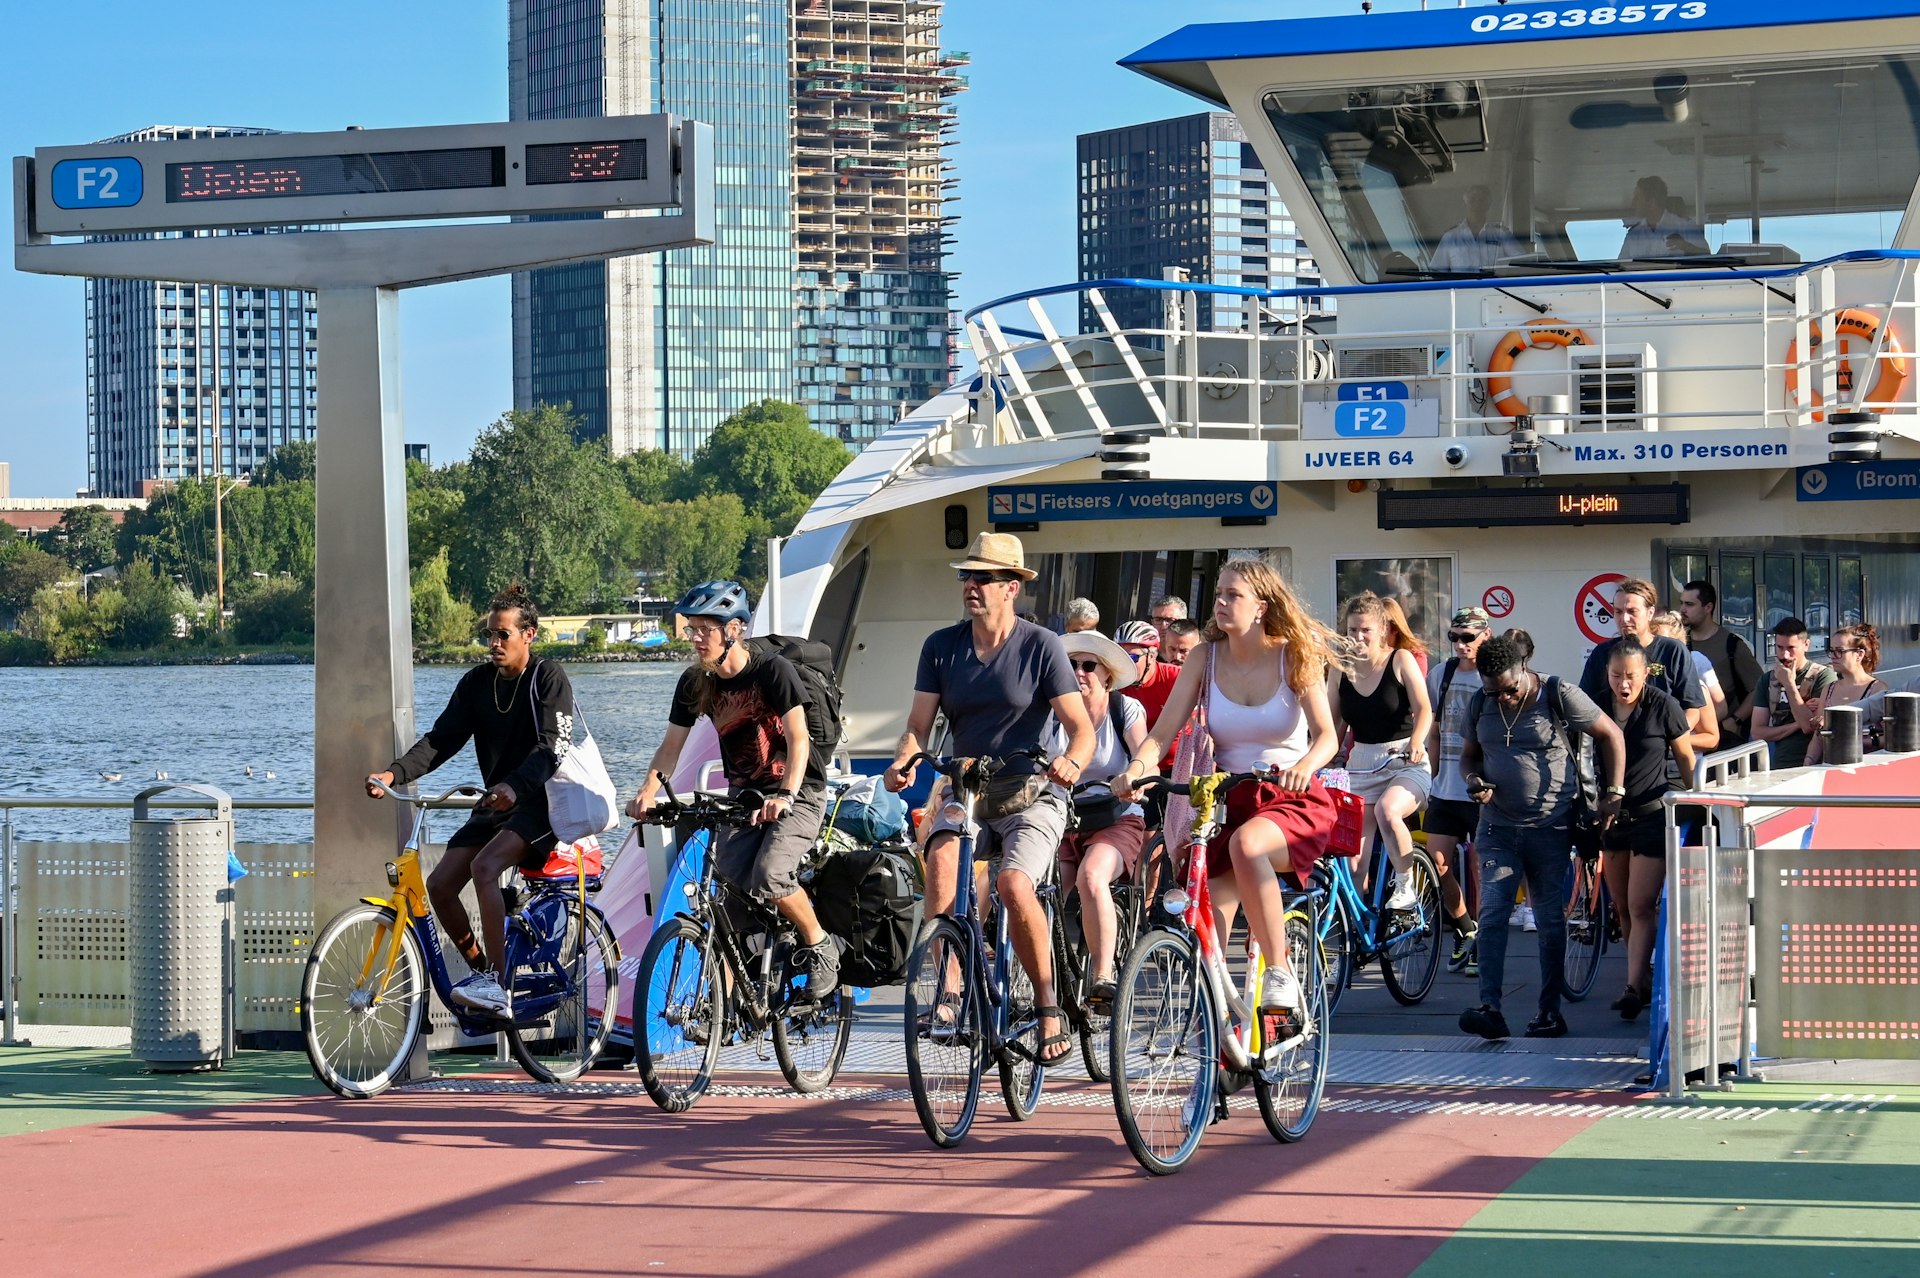 People on bicycles riding off a shuttle ferry service on the waterfront in Amsterdam